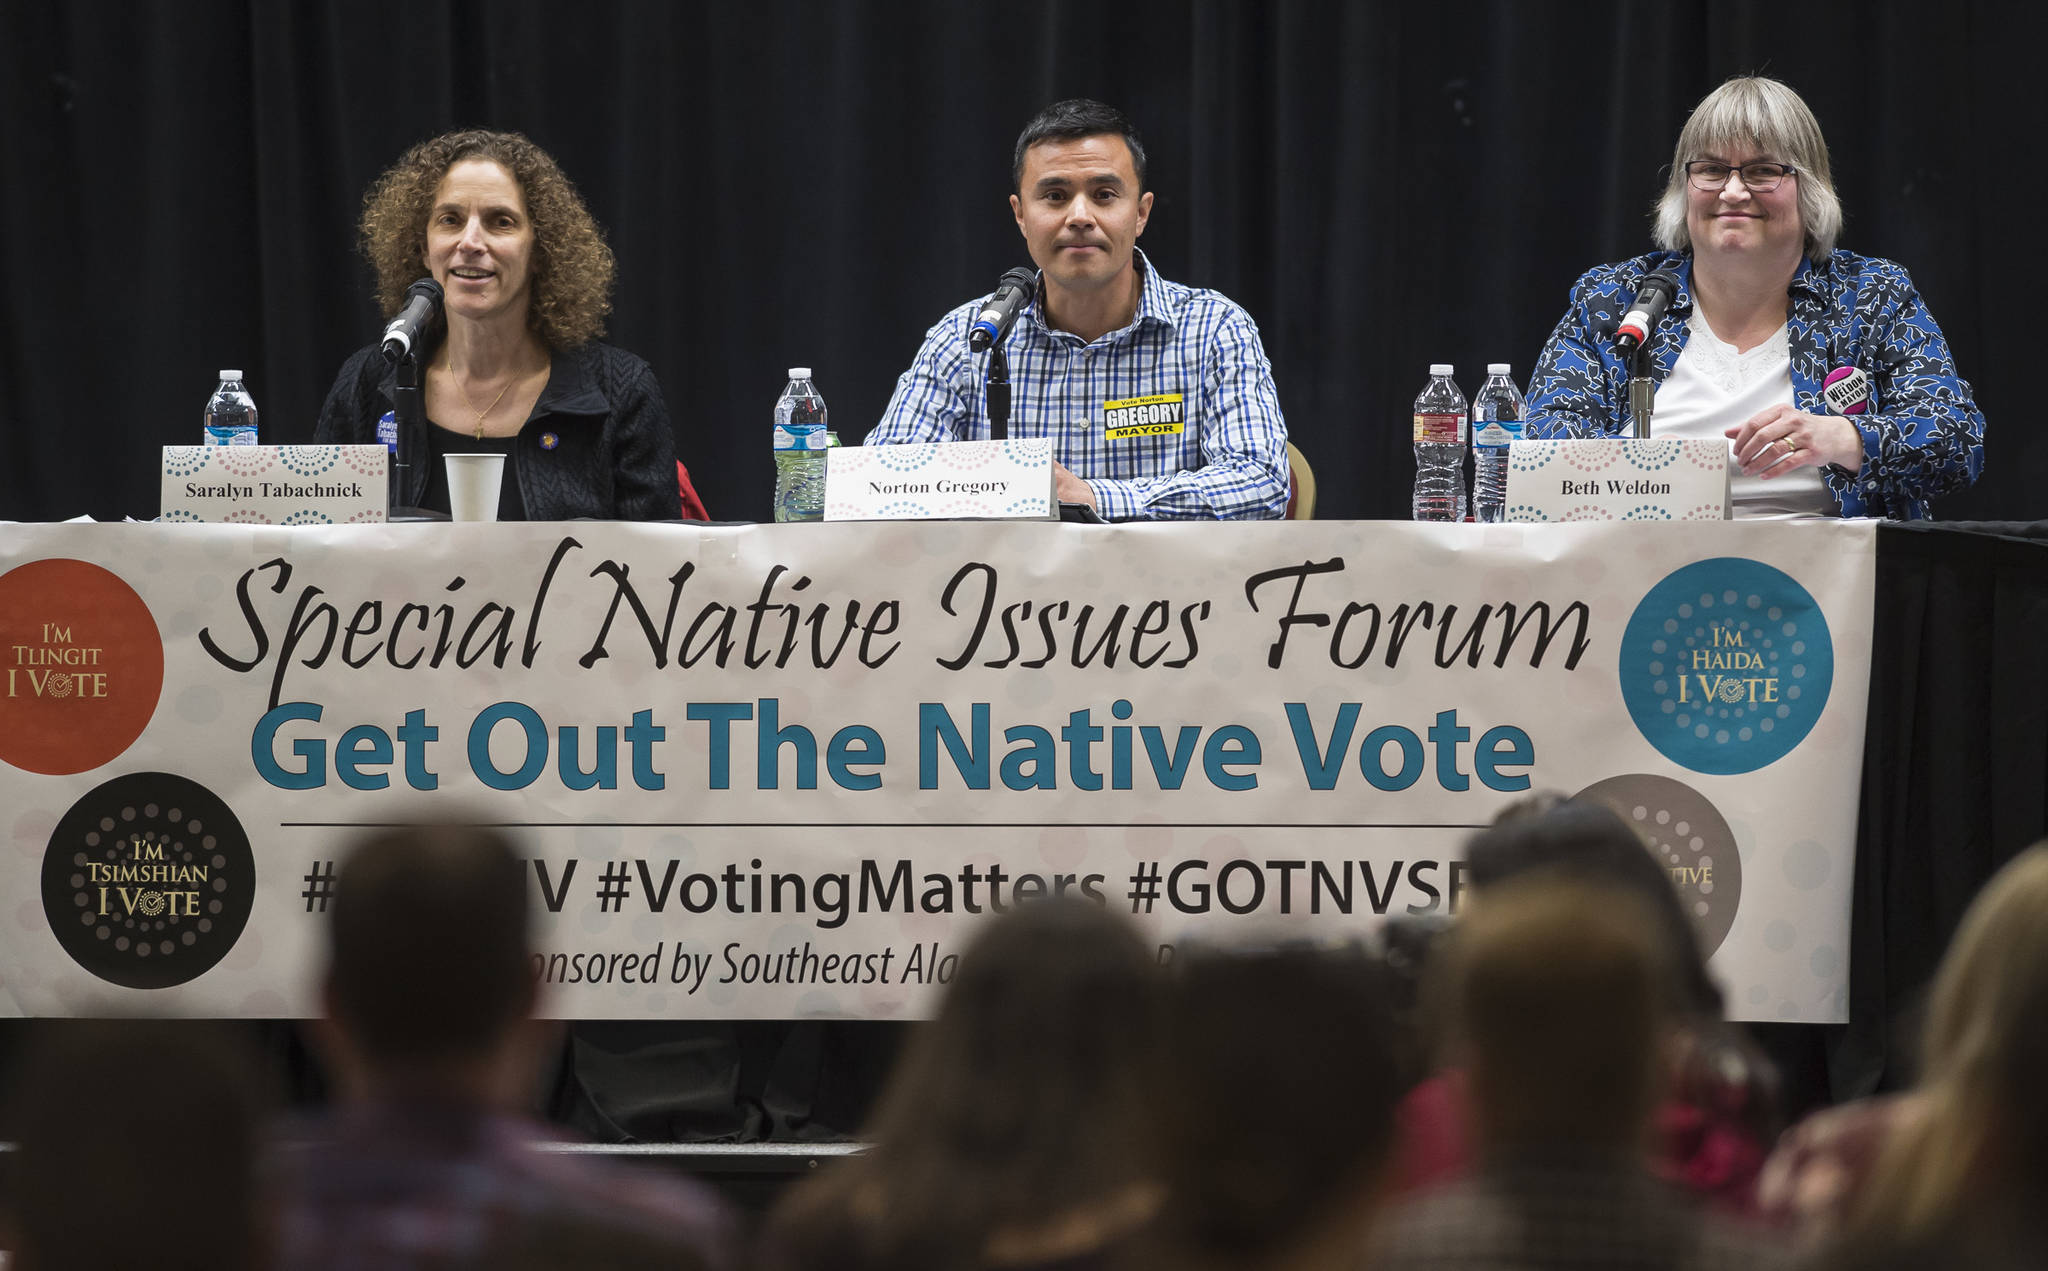 Mayoral candidates Saralyn Tabachnick, left, Norton Gregory, center, and Beth Weldon answer questions during a Special Native Issues Forum at the Elizabeth Peratrovich Hall on Tuesday, Sept. 18, 2018. (Michael Penn | Juneau Empire)